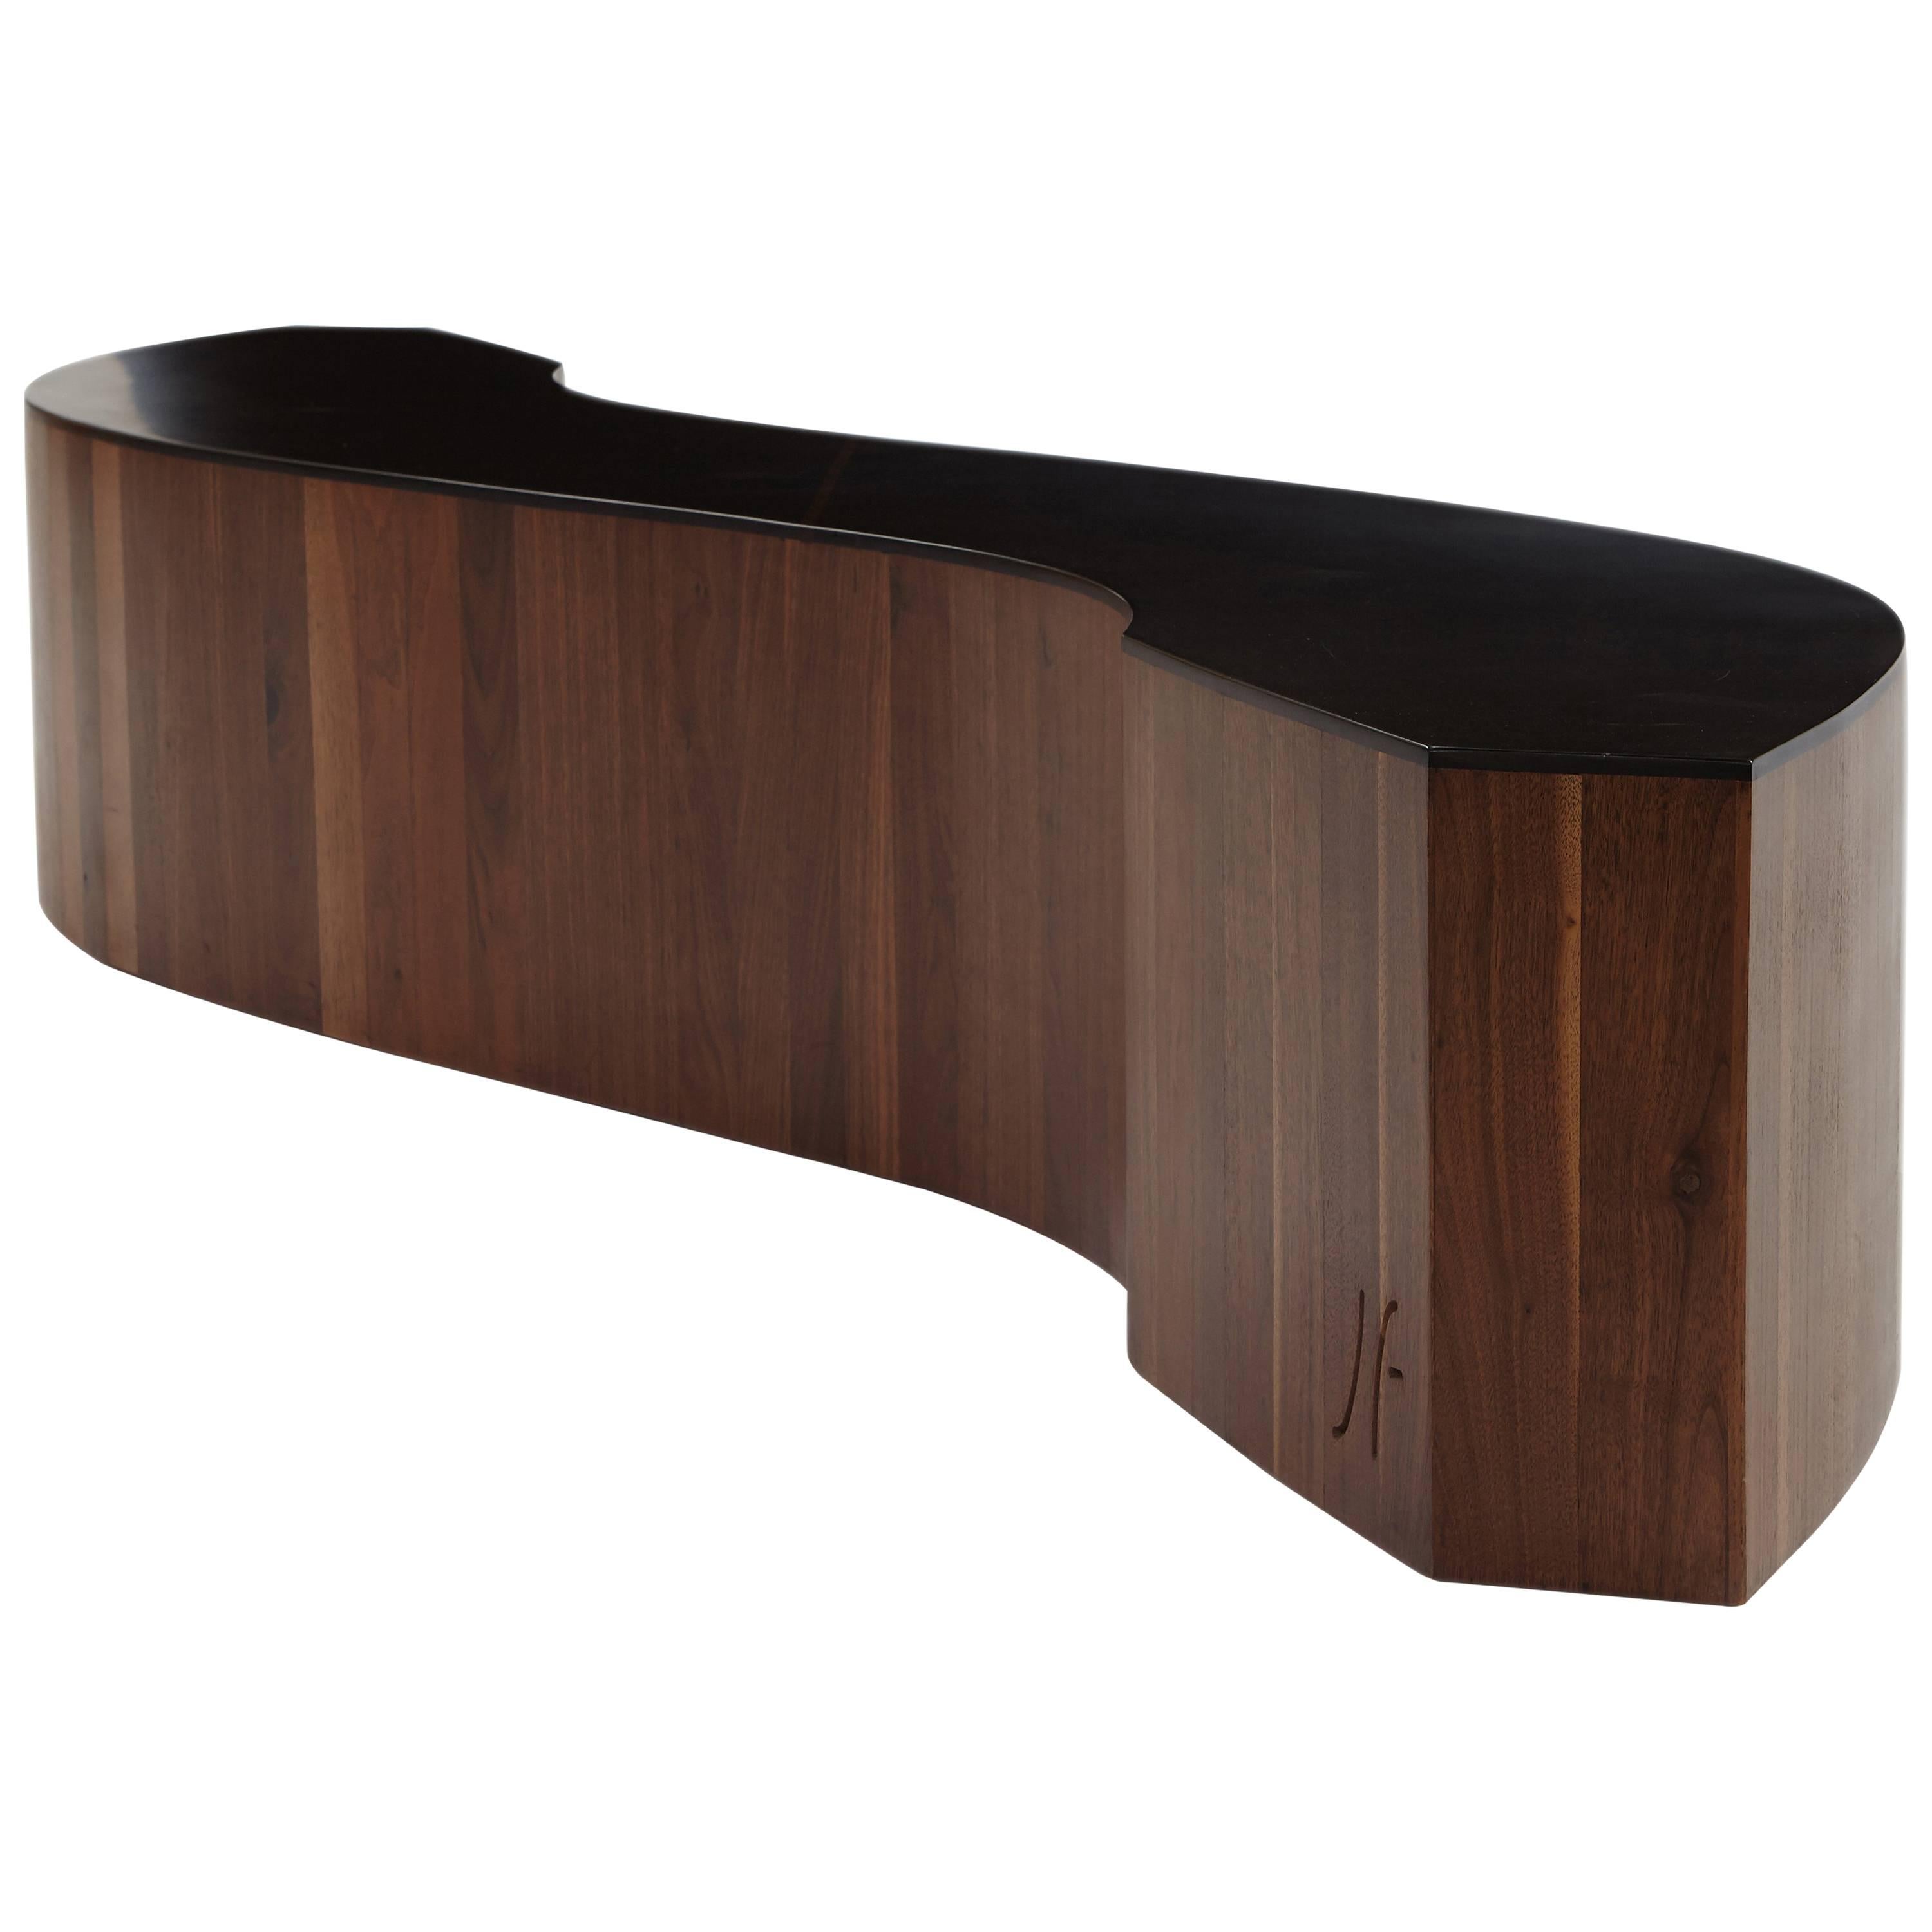 Gallery Bench in walnut or oak with a corian top. bespoke size by Jonathan Field For Sale